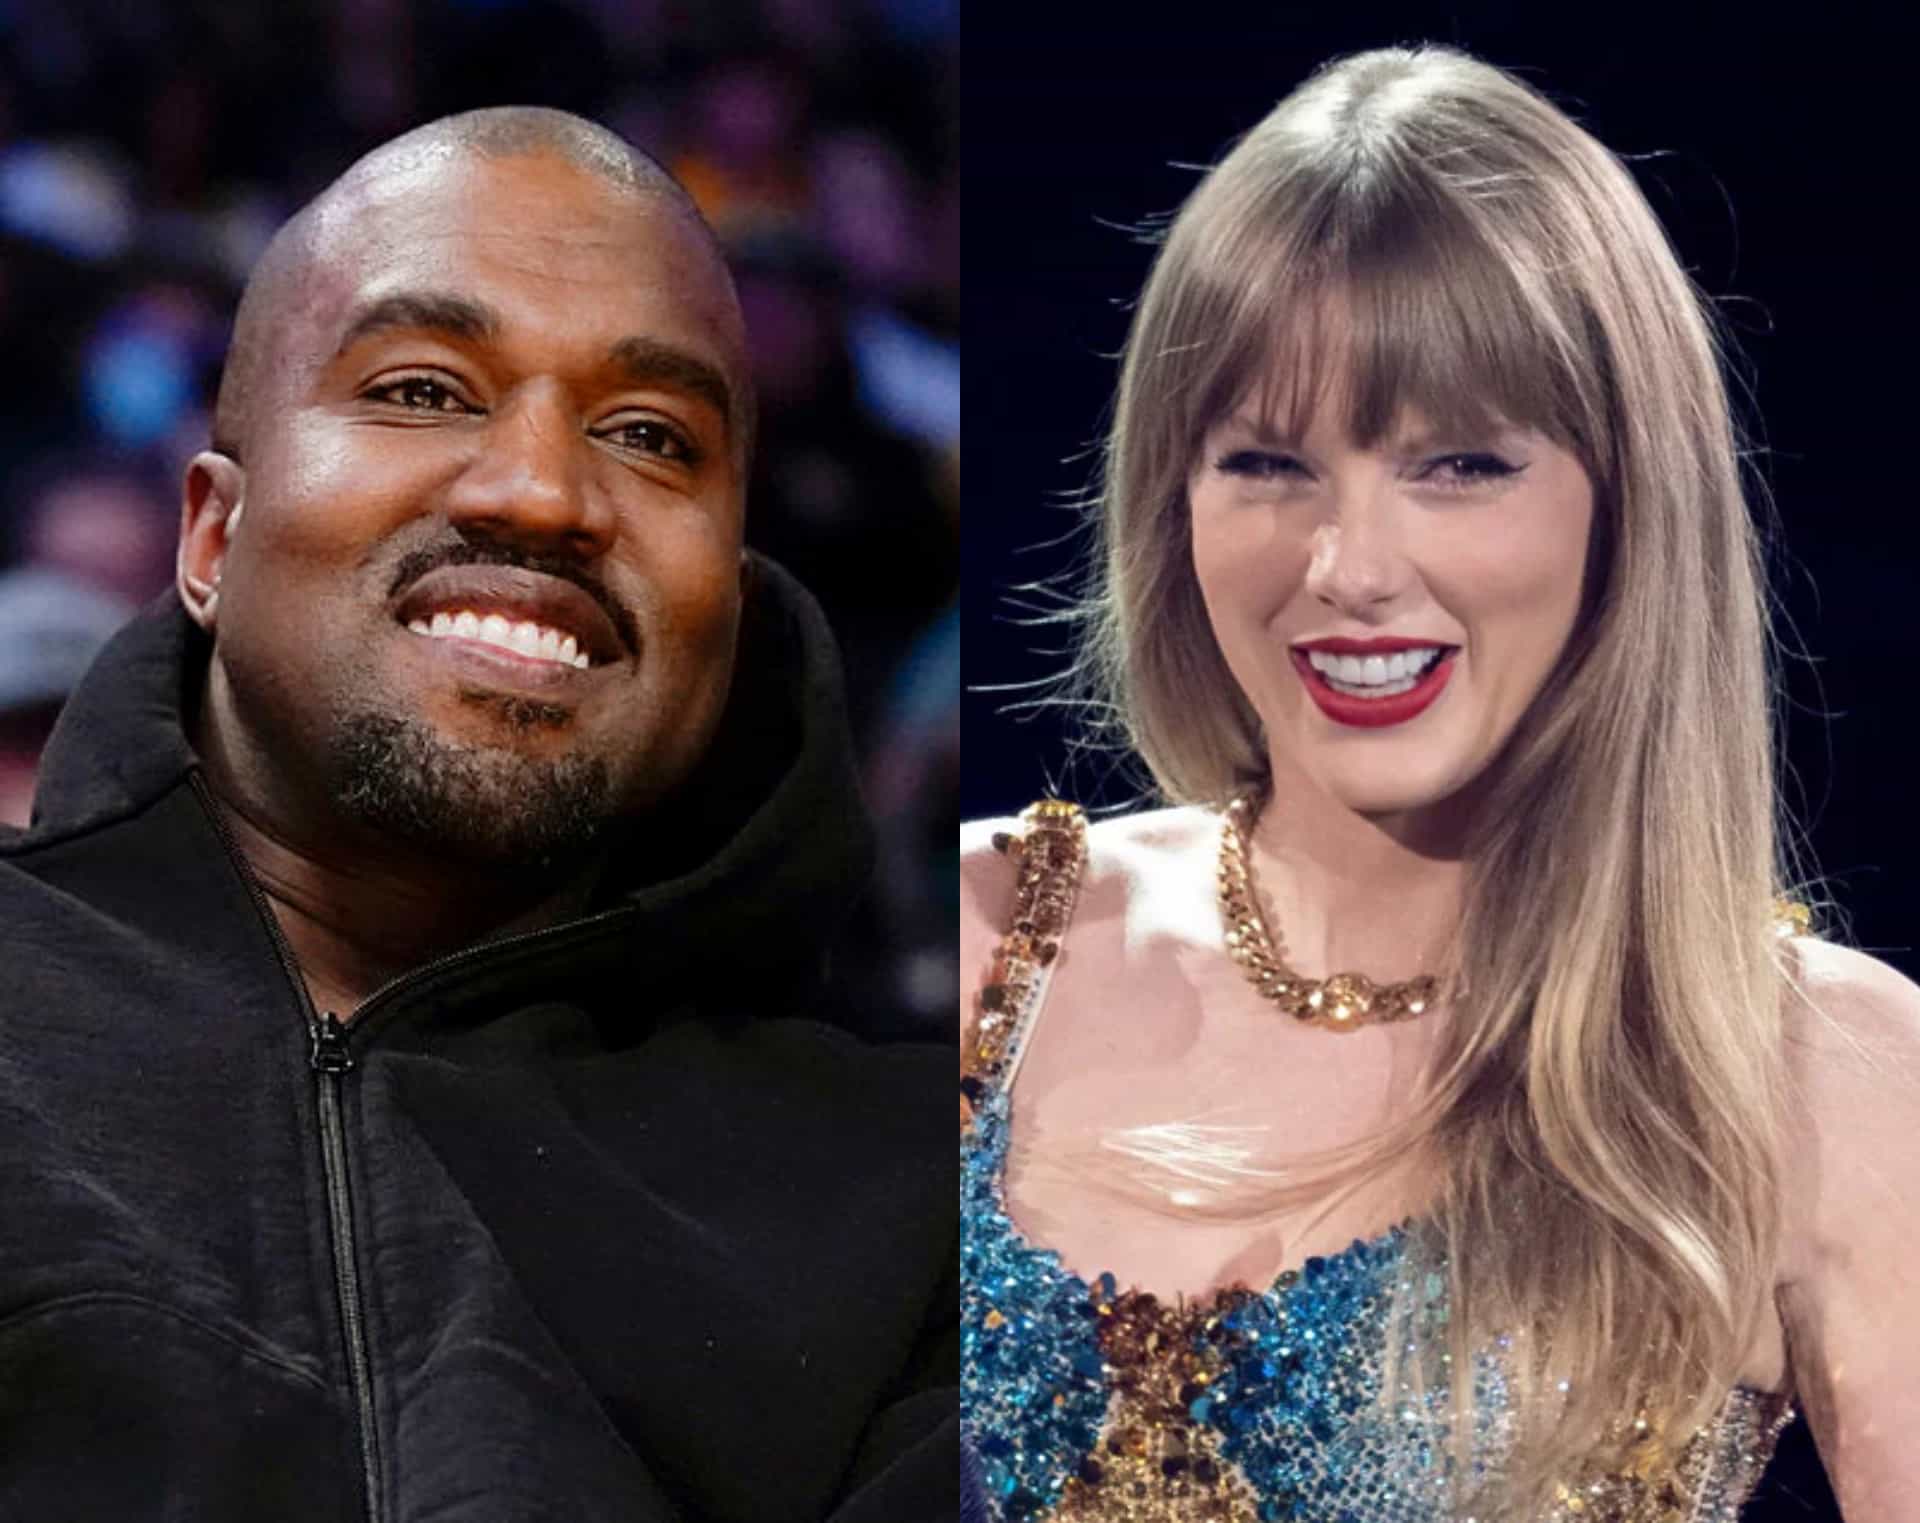 Kanye West Responds To Taylor Swift & Her Fans I'm Not Your Enemy